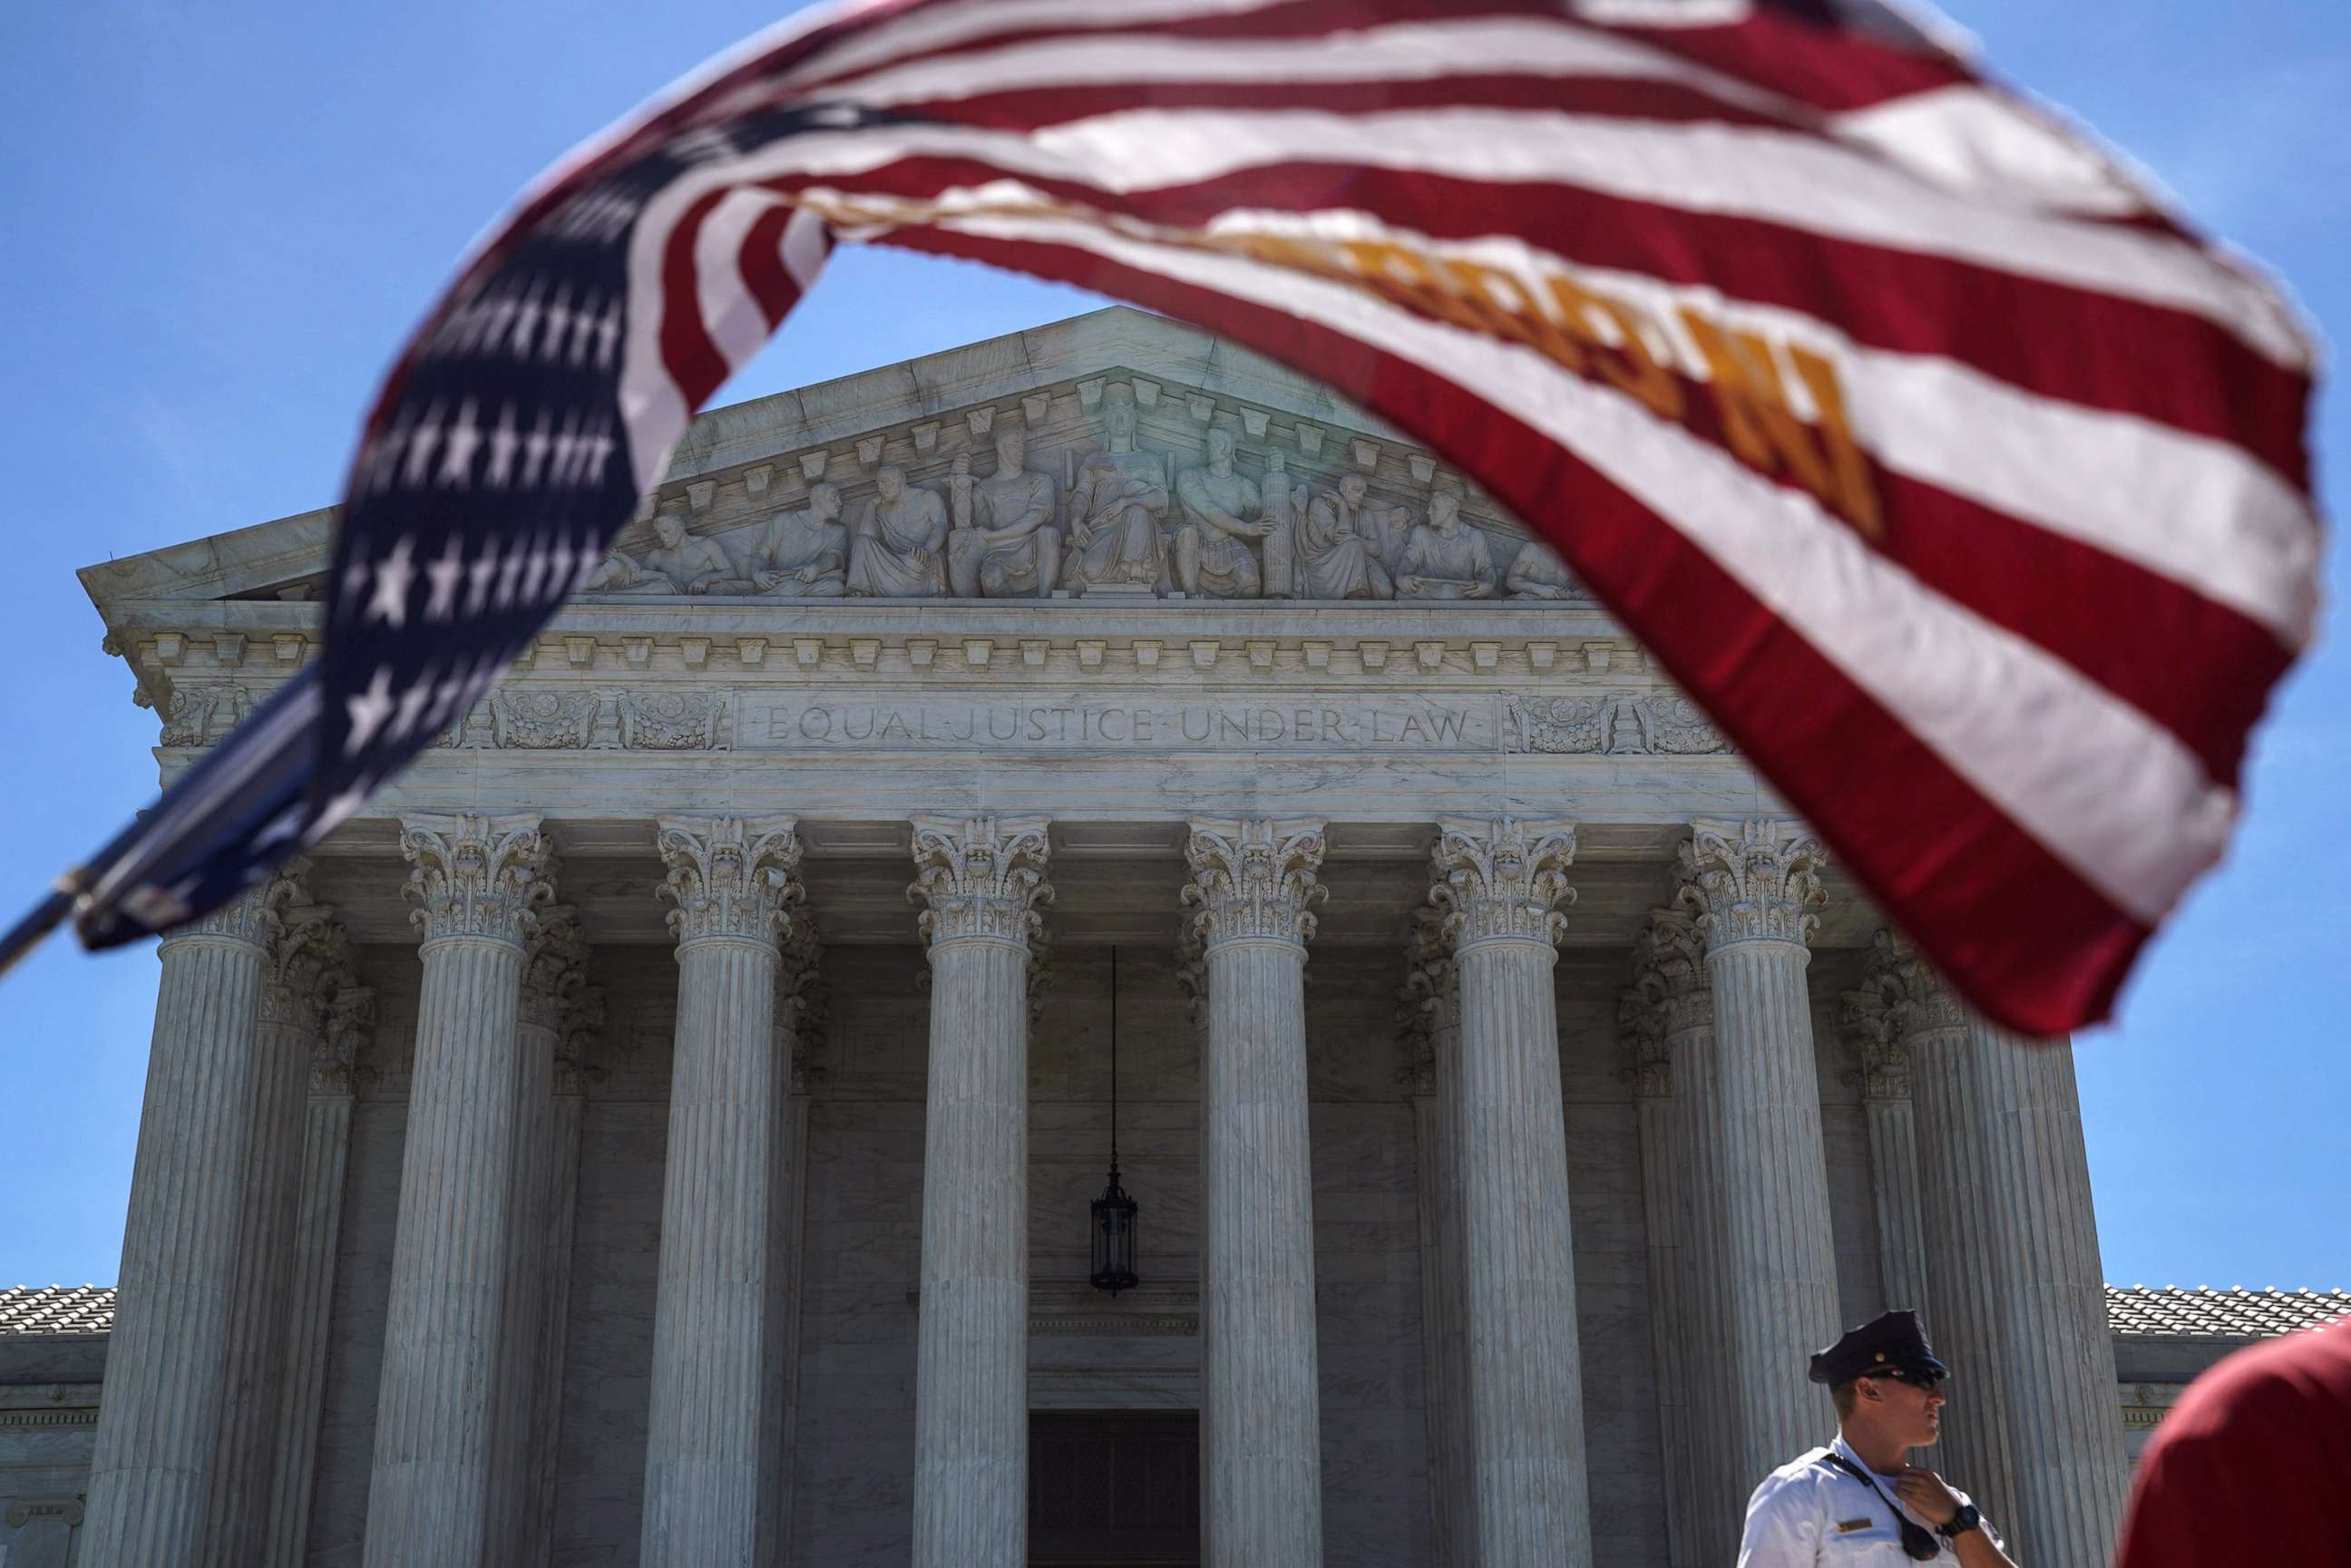 PHOTO: A man holds a flag outside the U.S. Supreme Court, as the Trump v. Hawaii case regarding travel restrictions in the U.S. remains pending, in Washington, D.C., June 25, 2018.